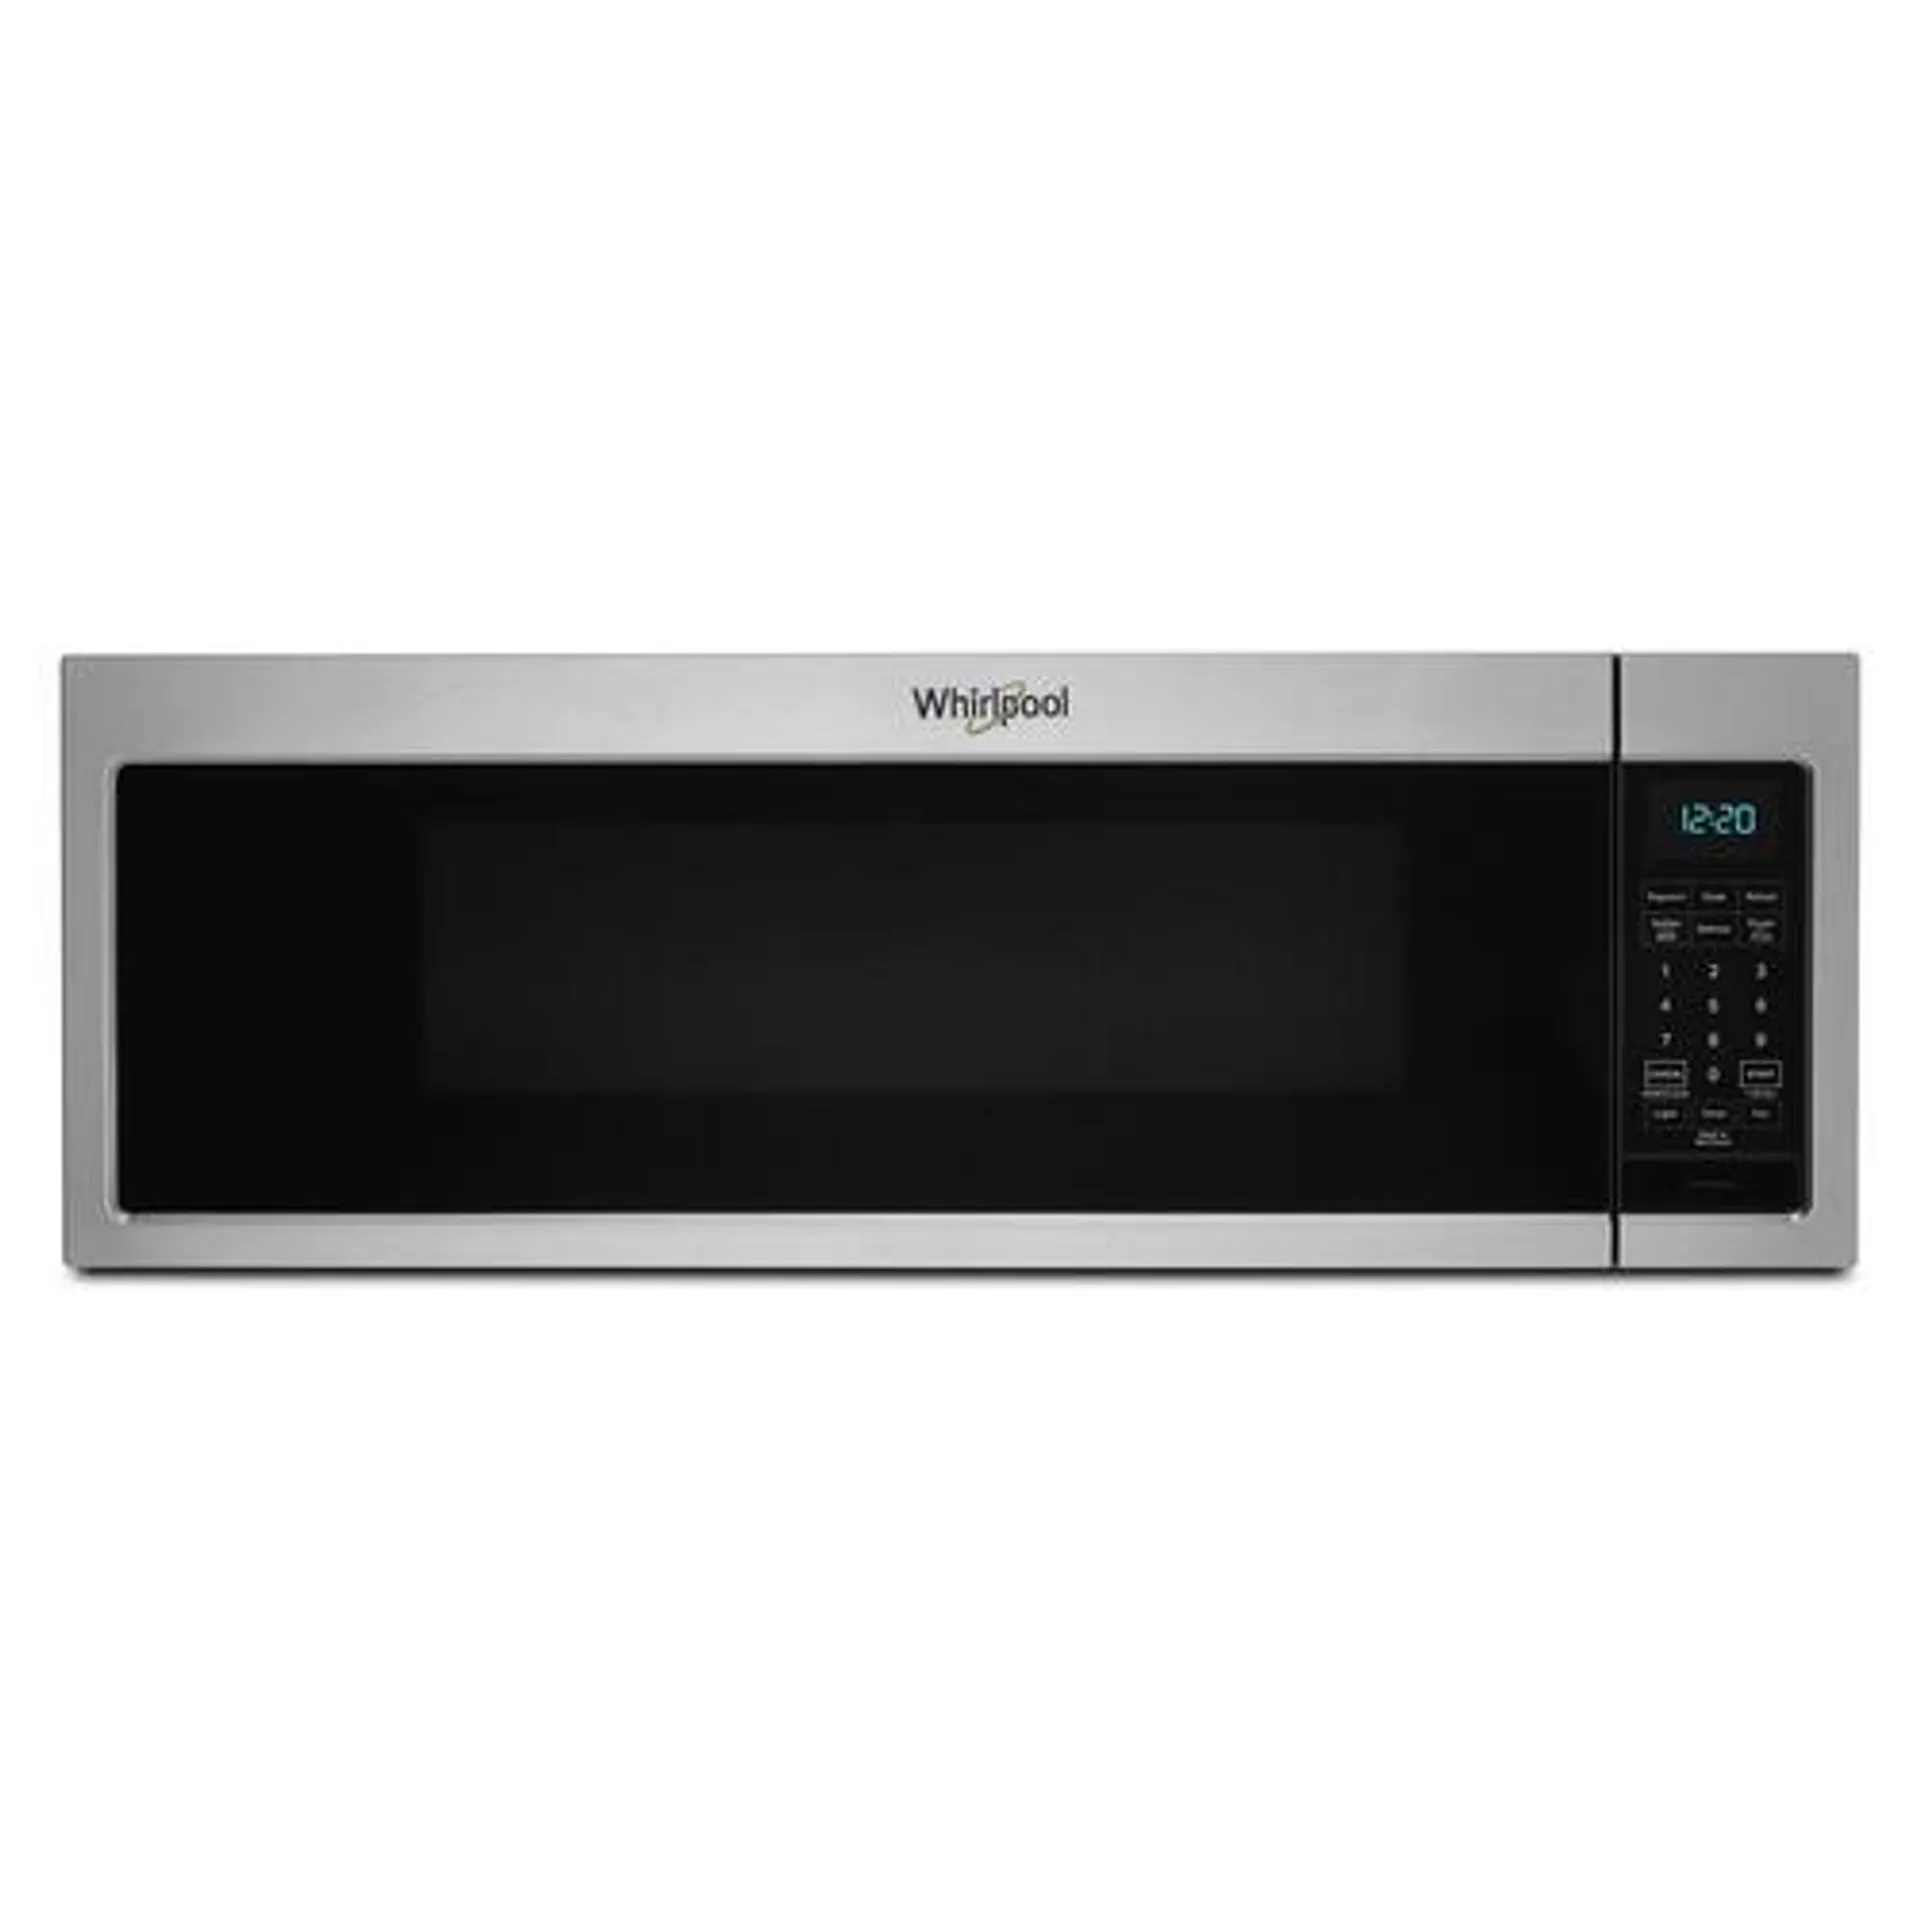 Whirlpool® 1.1 cu.ft. Stainless Steel Low Profile Over-the-Range Microwave